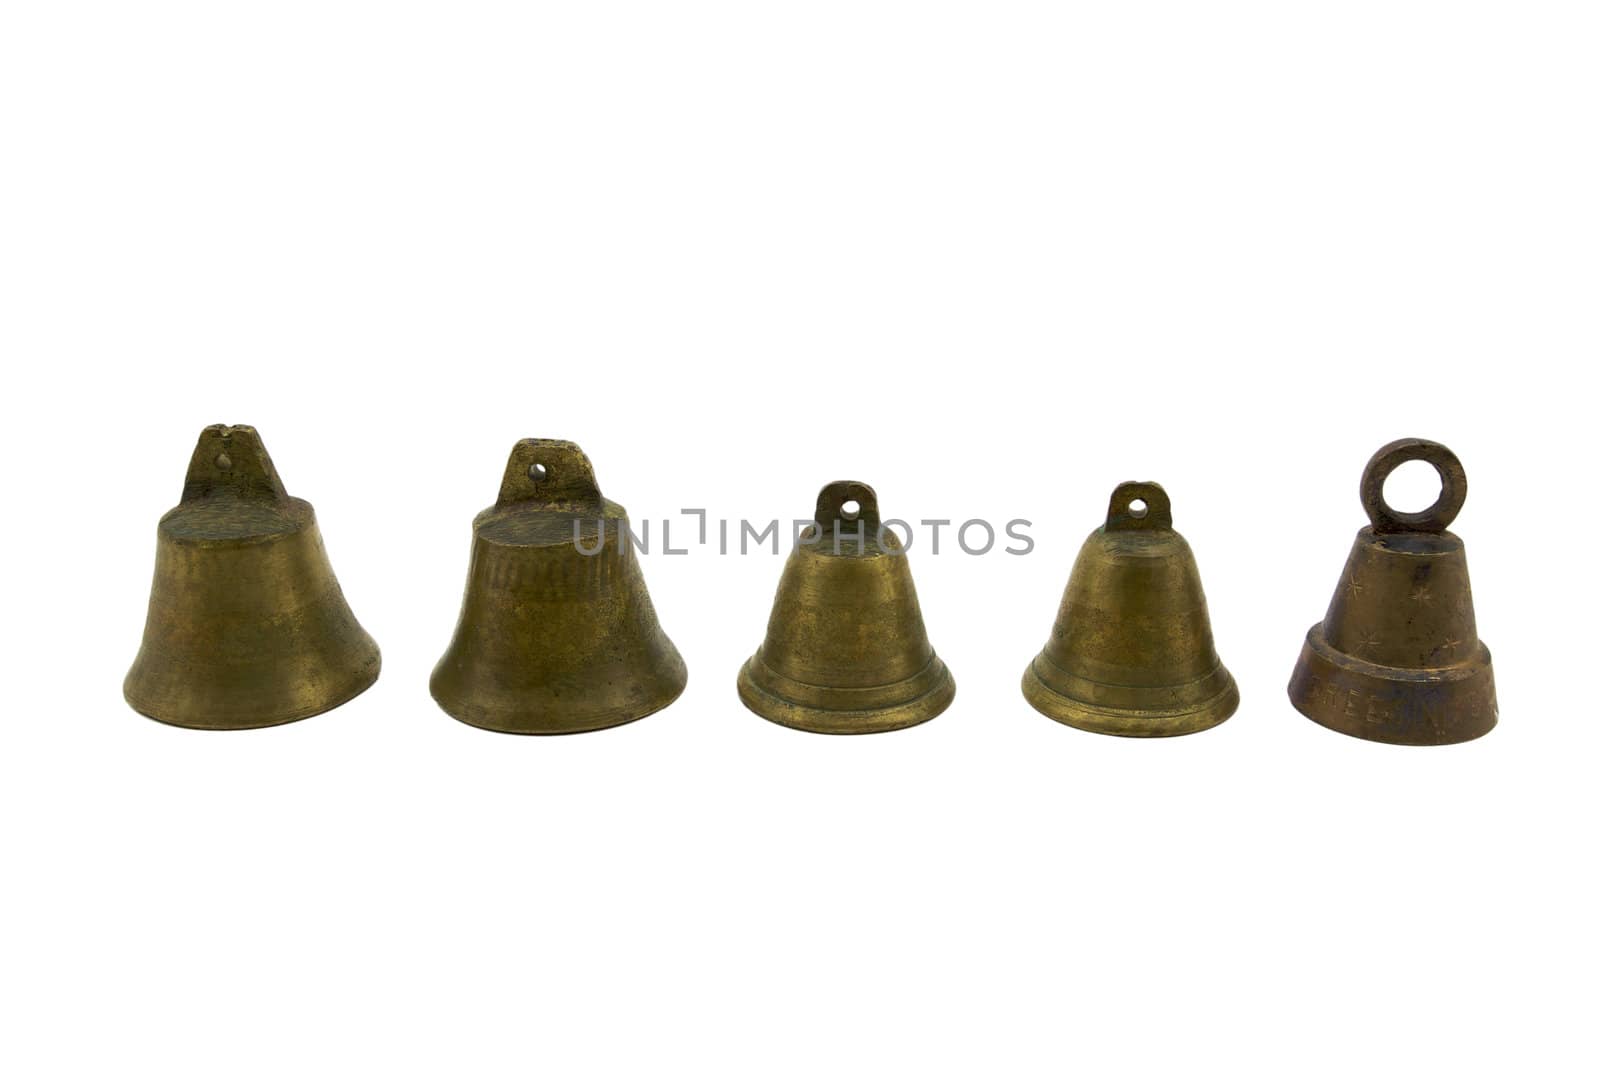 Five Small brass bells lined in a row on a white background